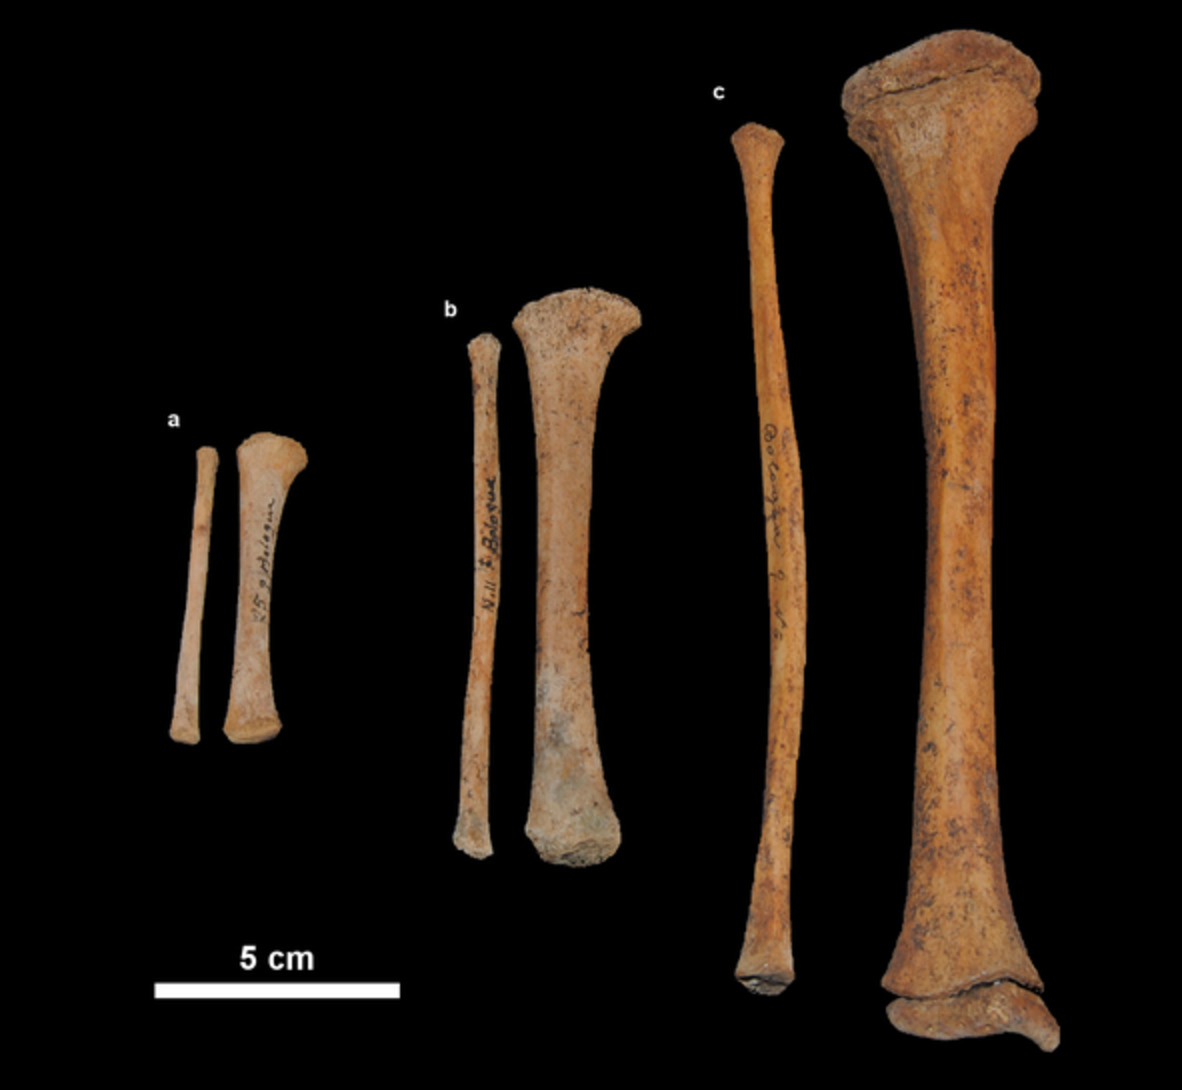 The relationship between bipedalism and growth: A metric assessment in a documented modern skeletal collection (Certosa Collection, Bologna, Italy)